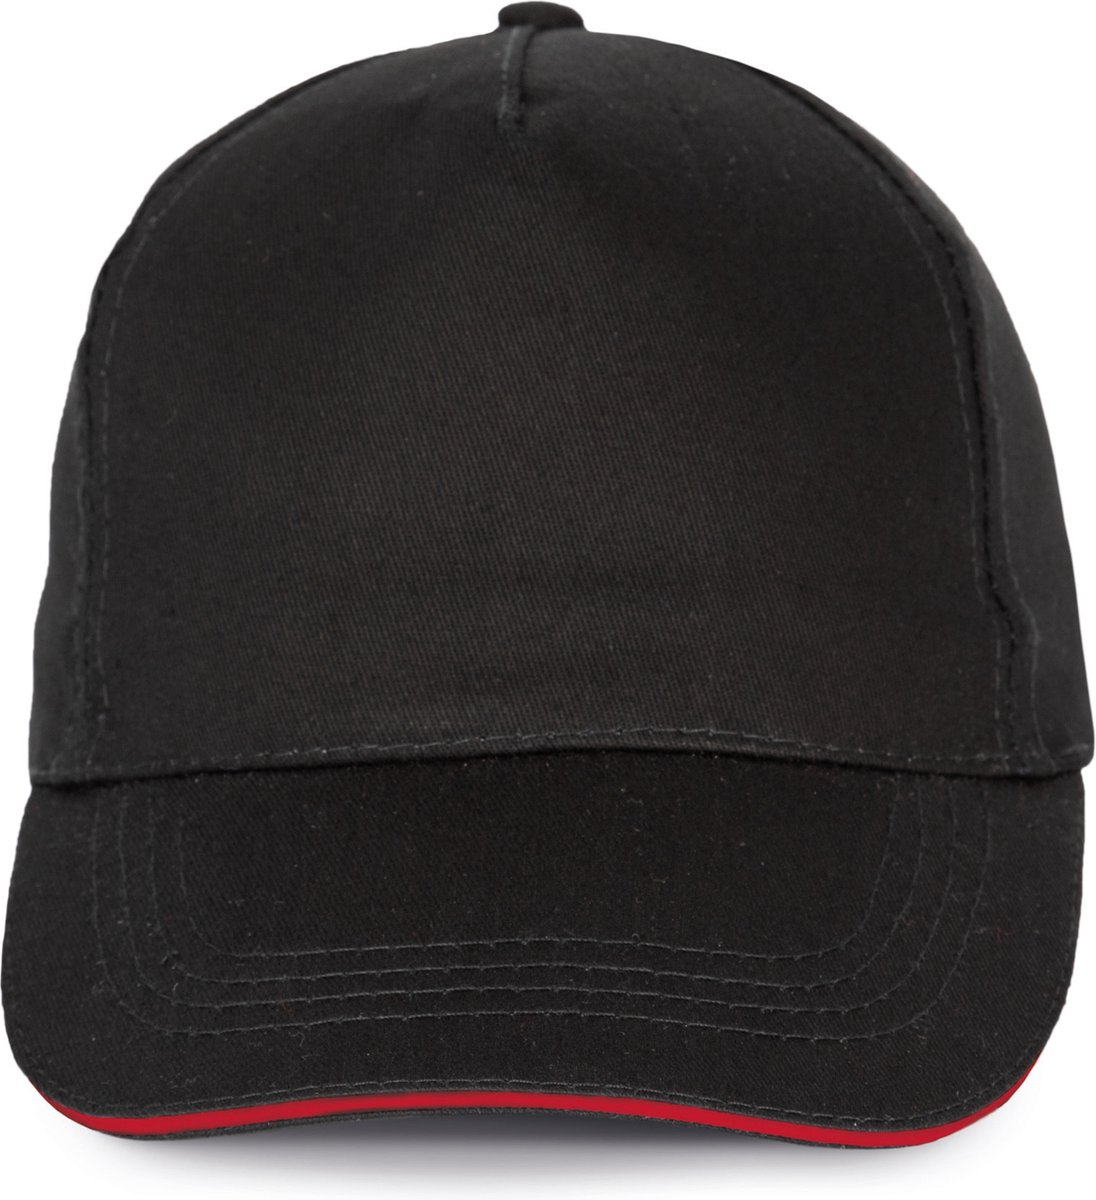 K-up 5 Panel Cap Black / Red - One Size